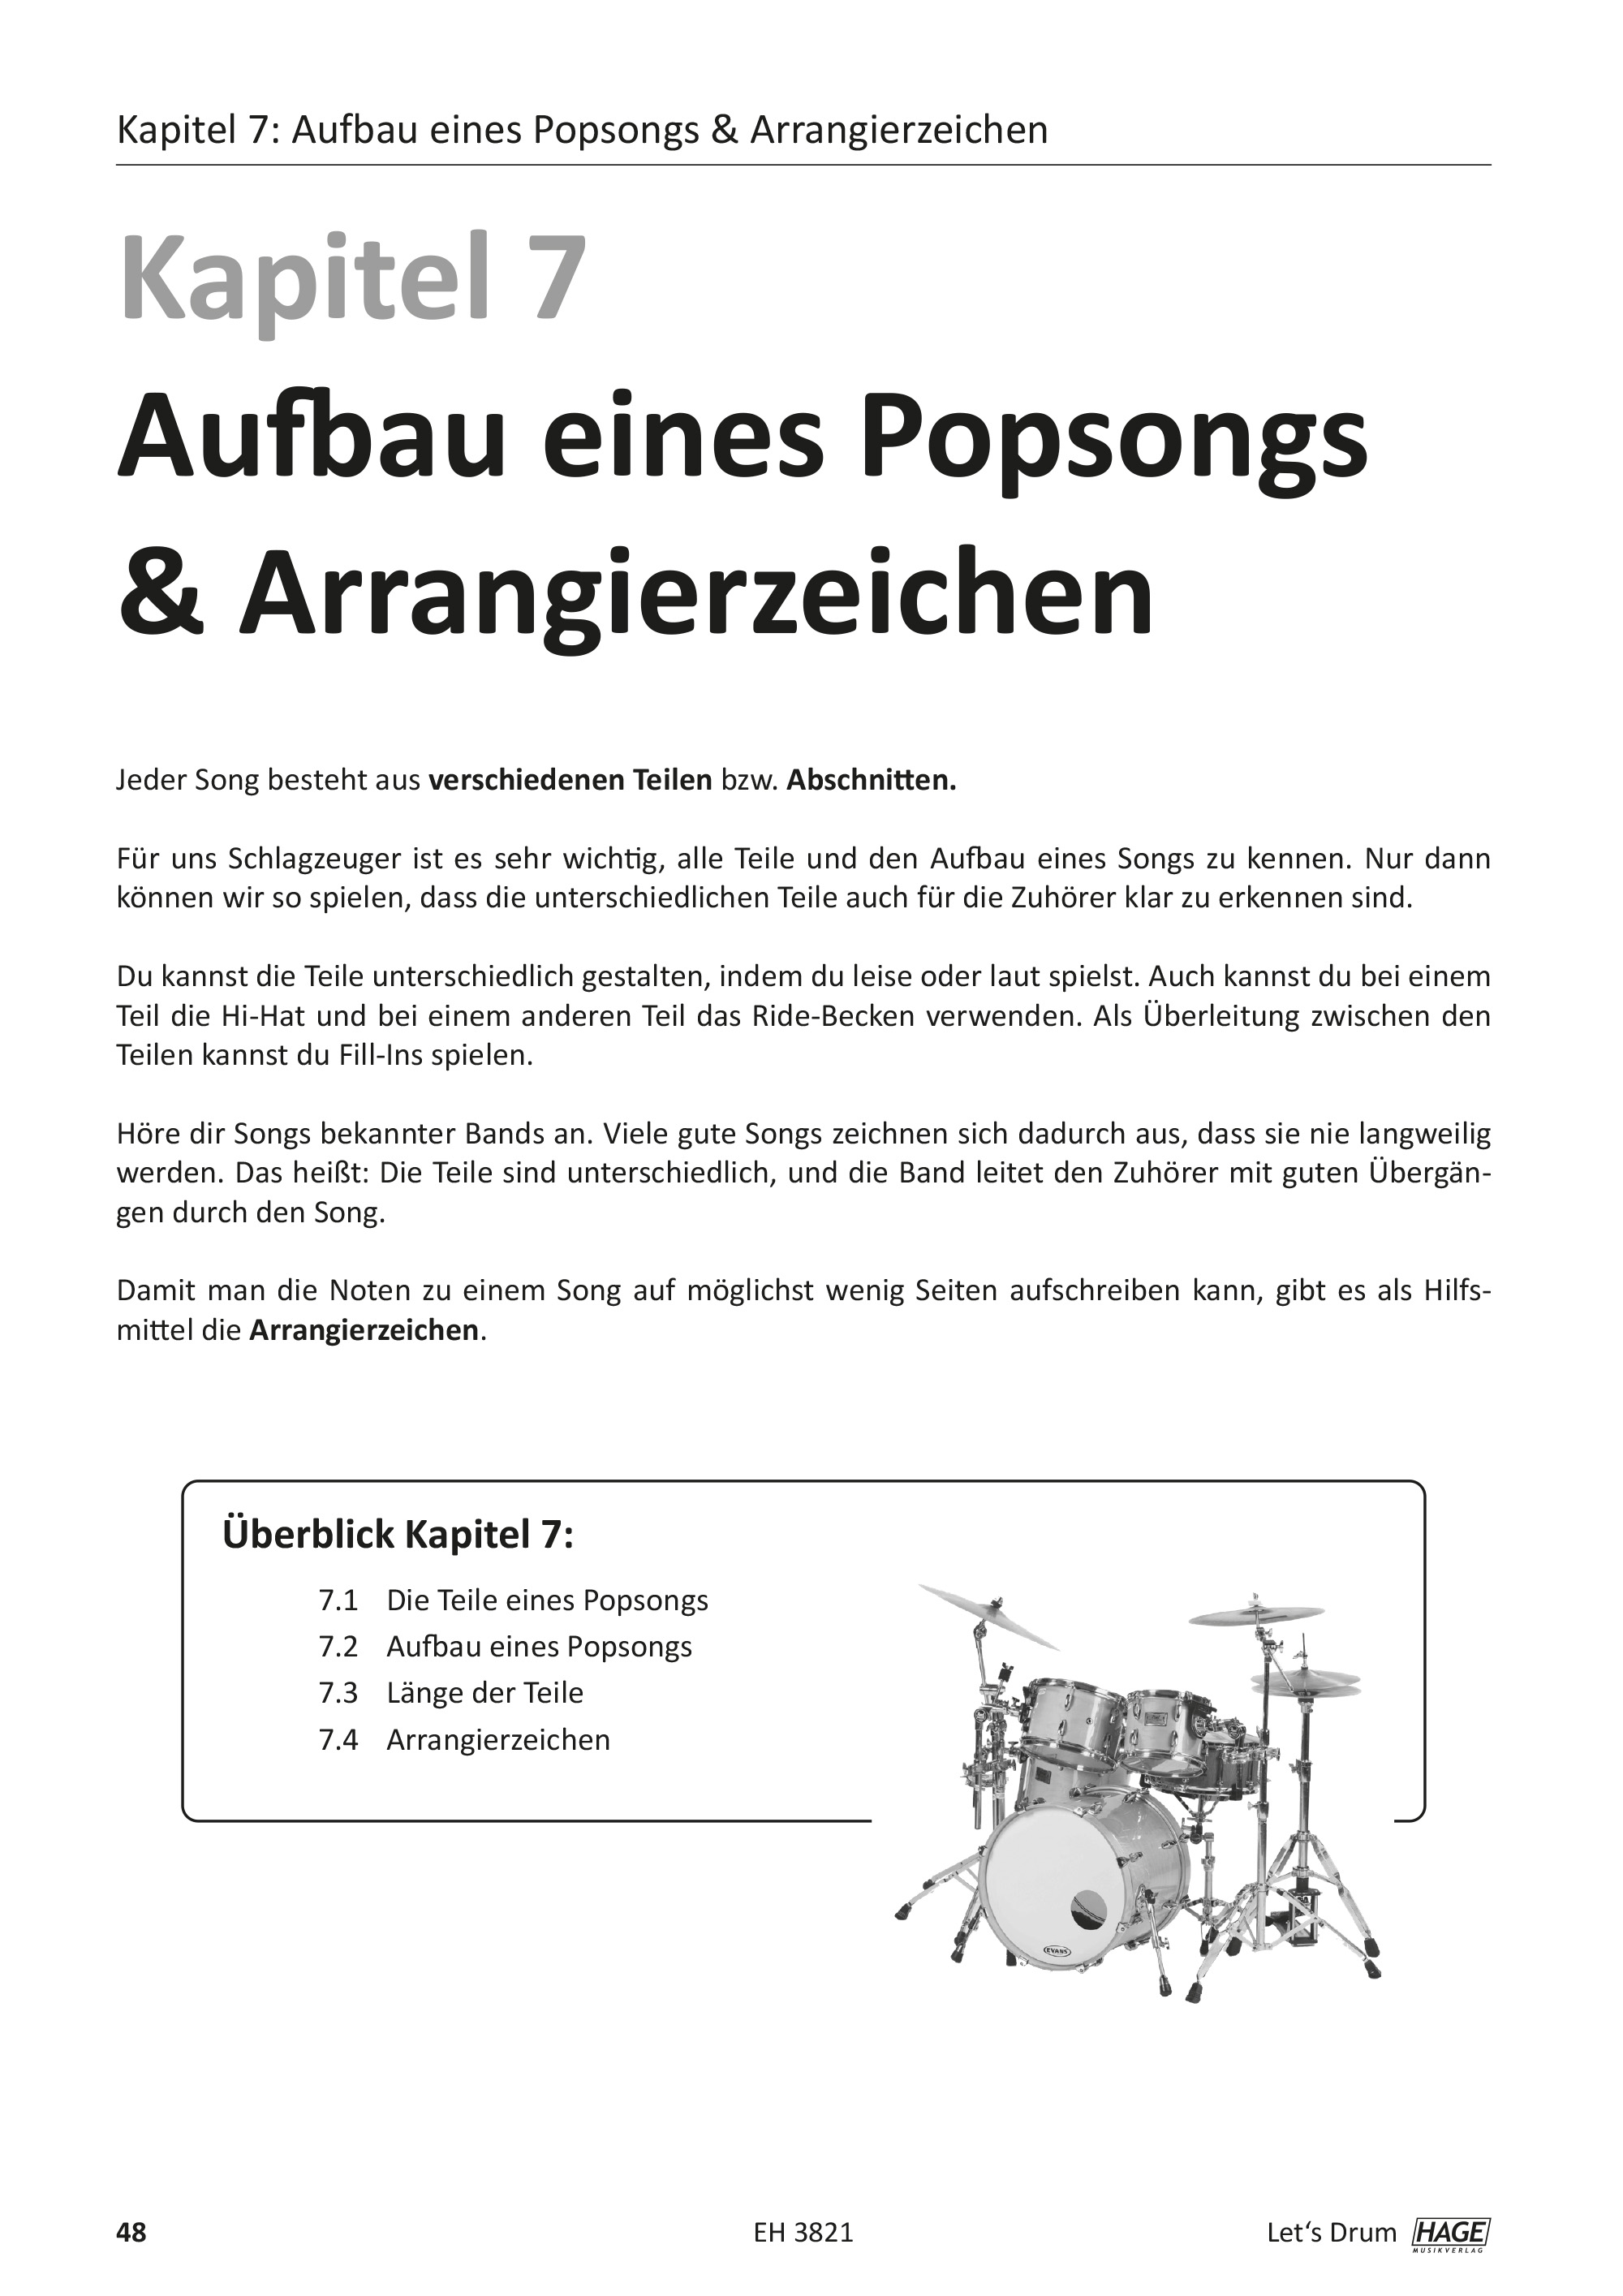 Let's Drum (with QR-Codes) Pages 10